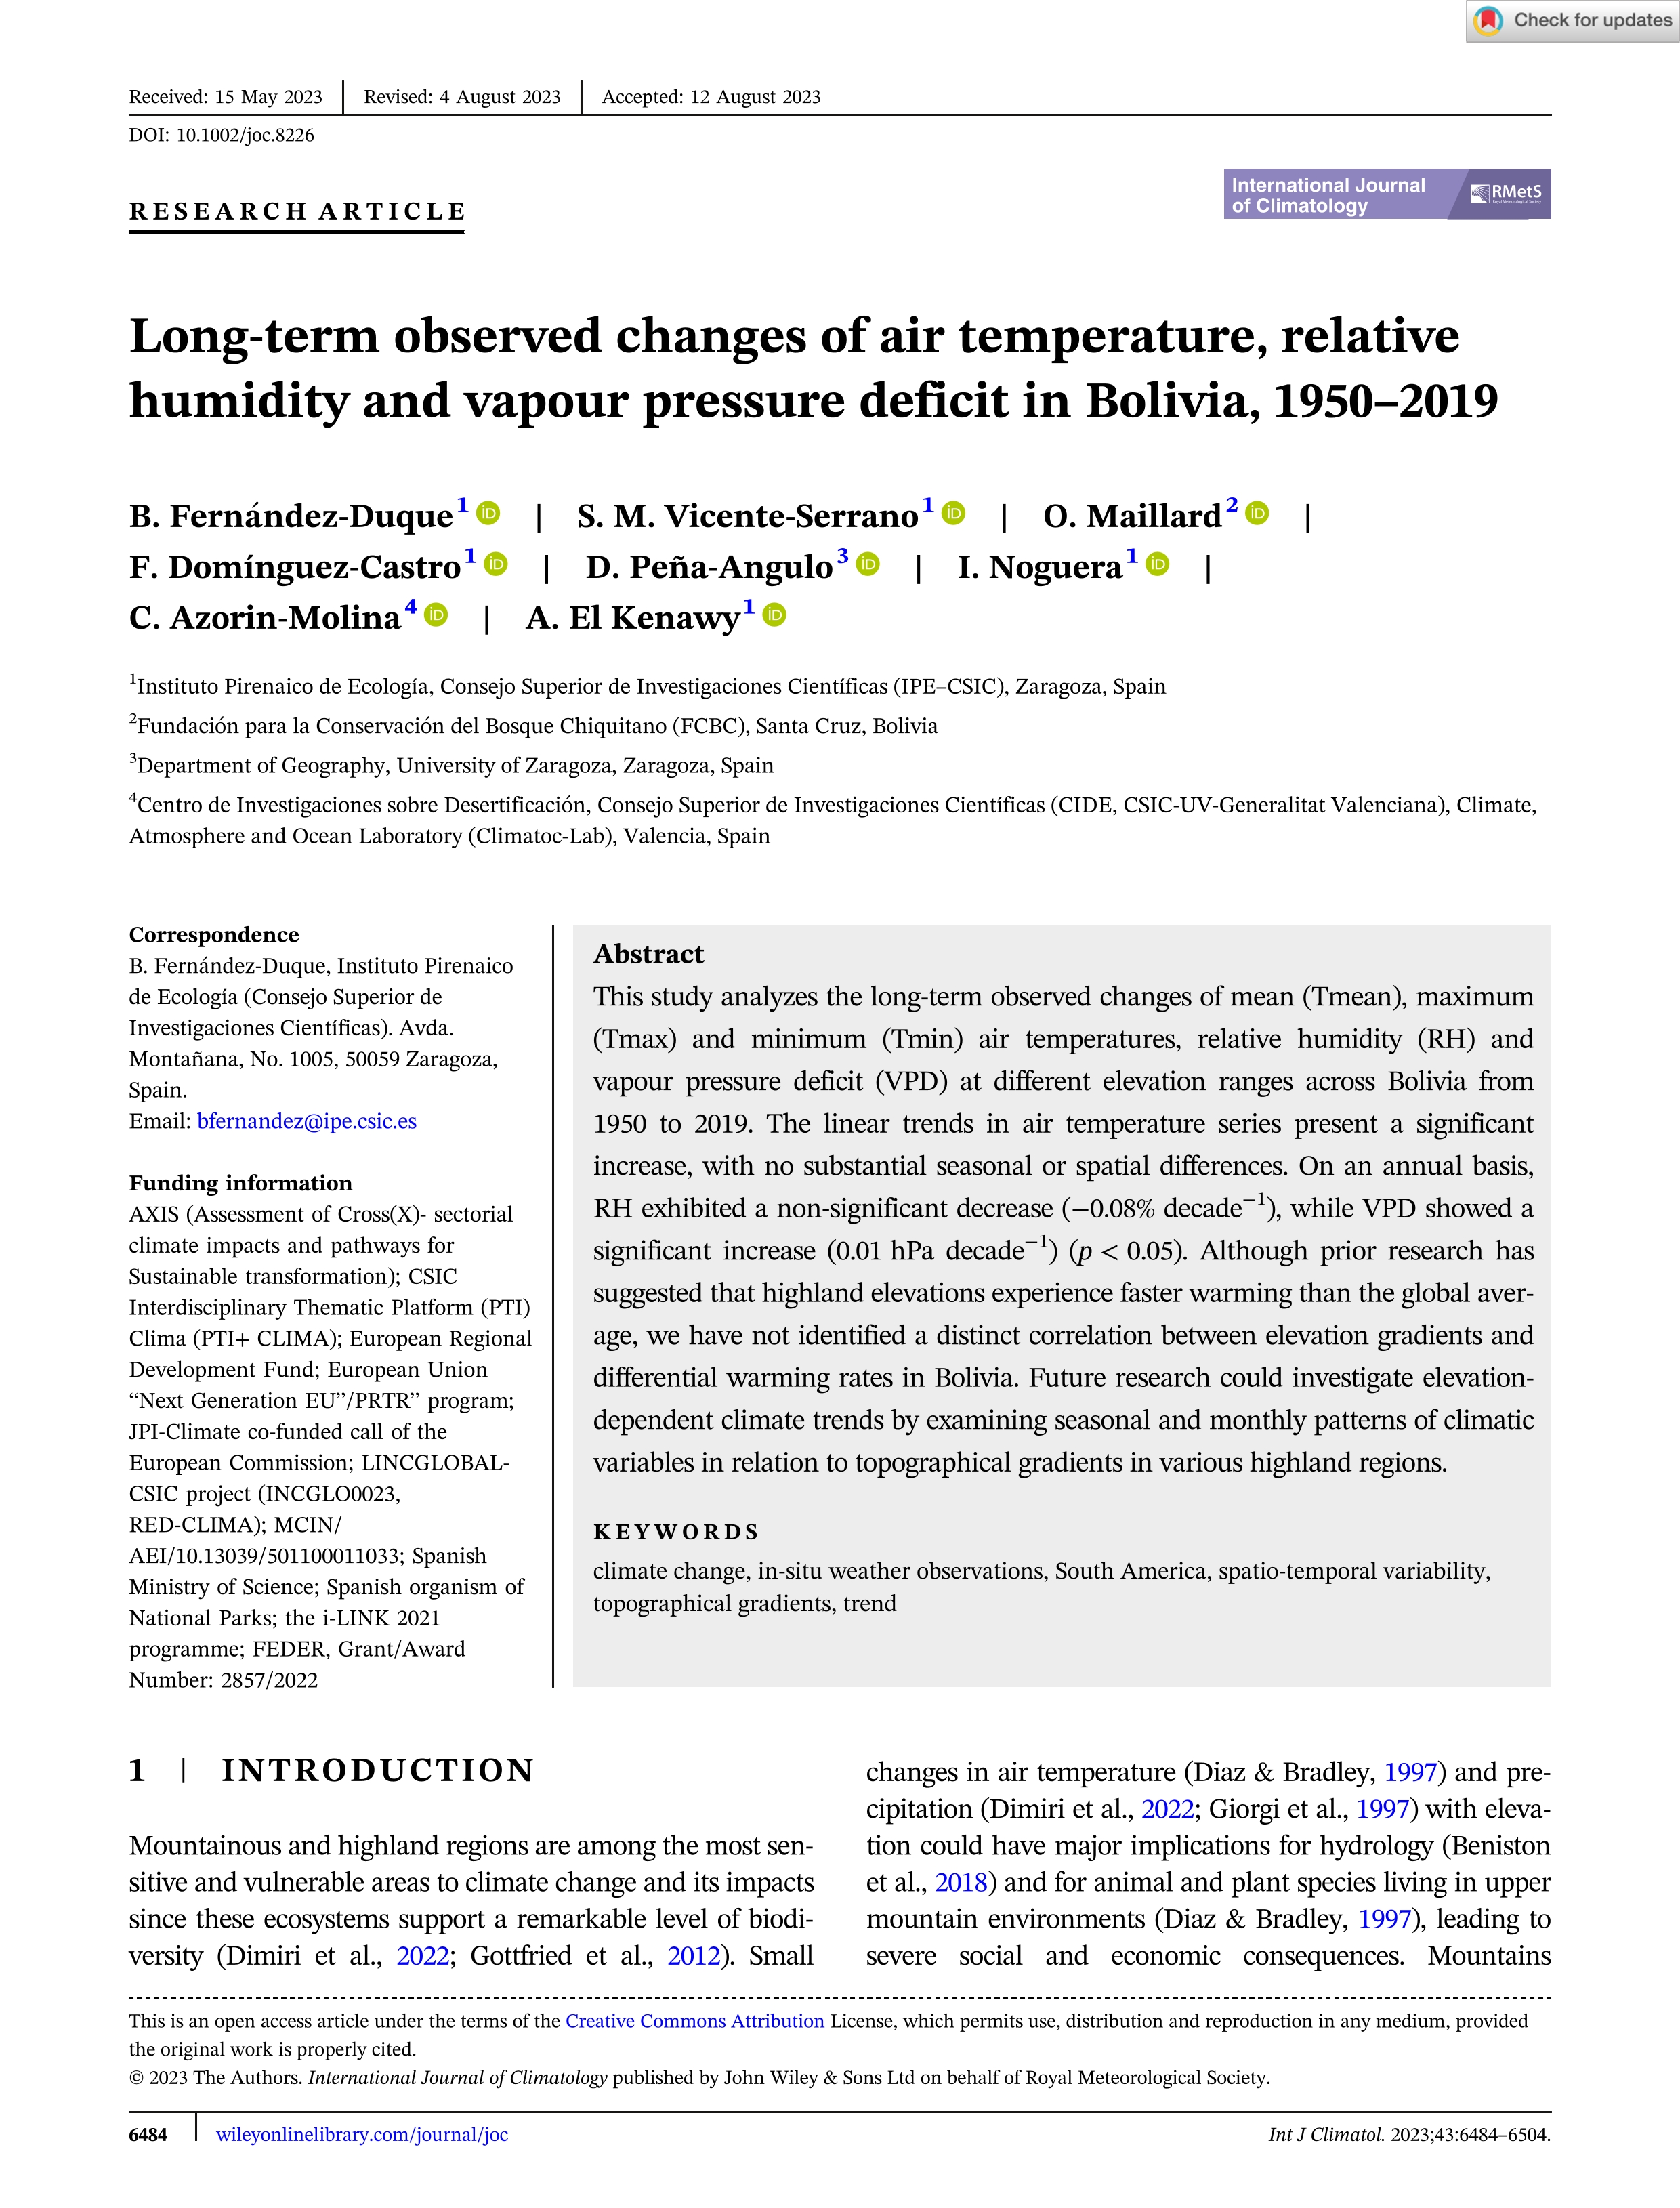 Long-term observed changes of air temperature, relative humidity and vapour pressure deficit in Bolivia, 1950–2019